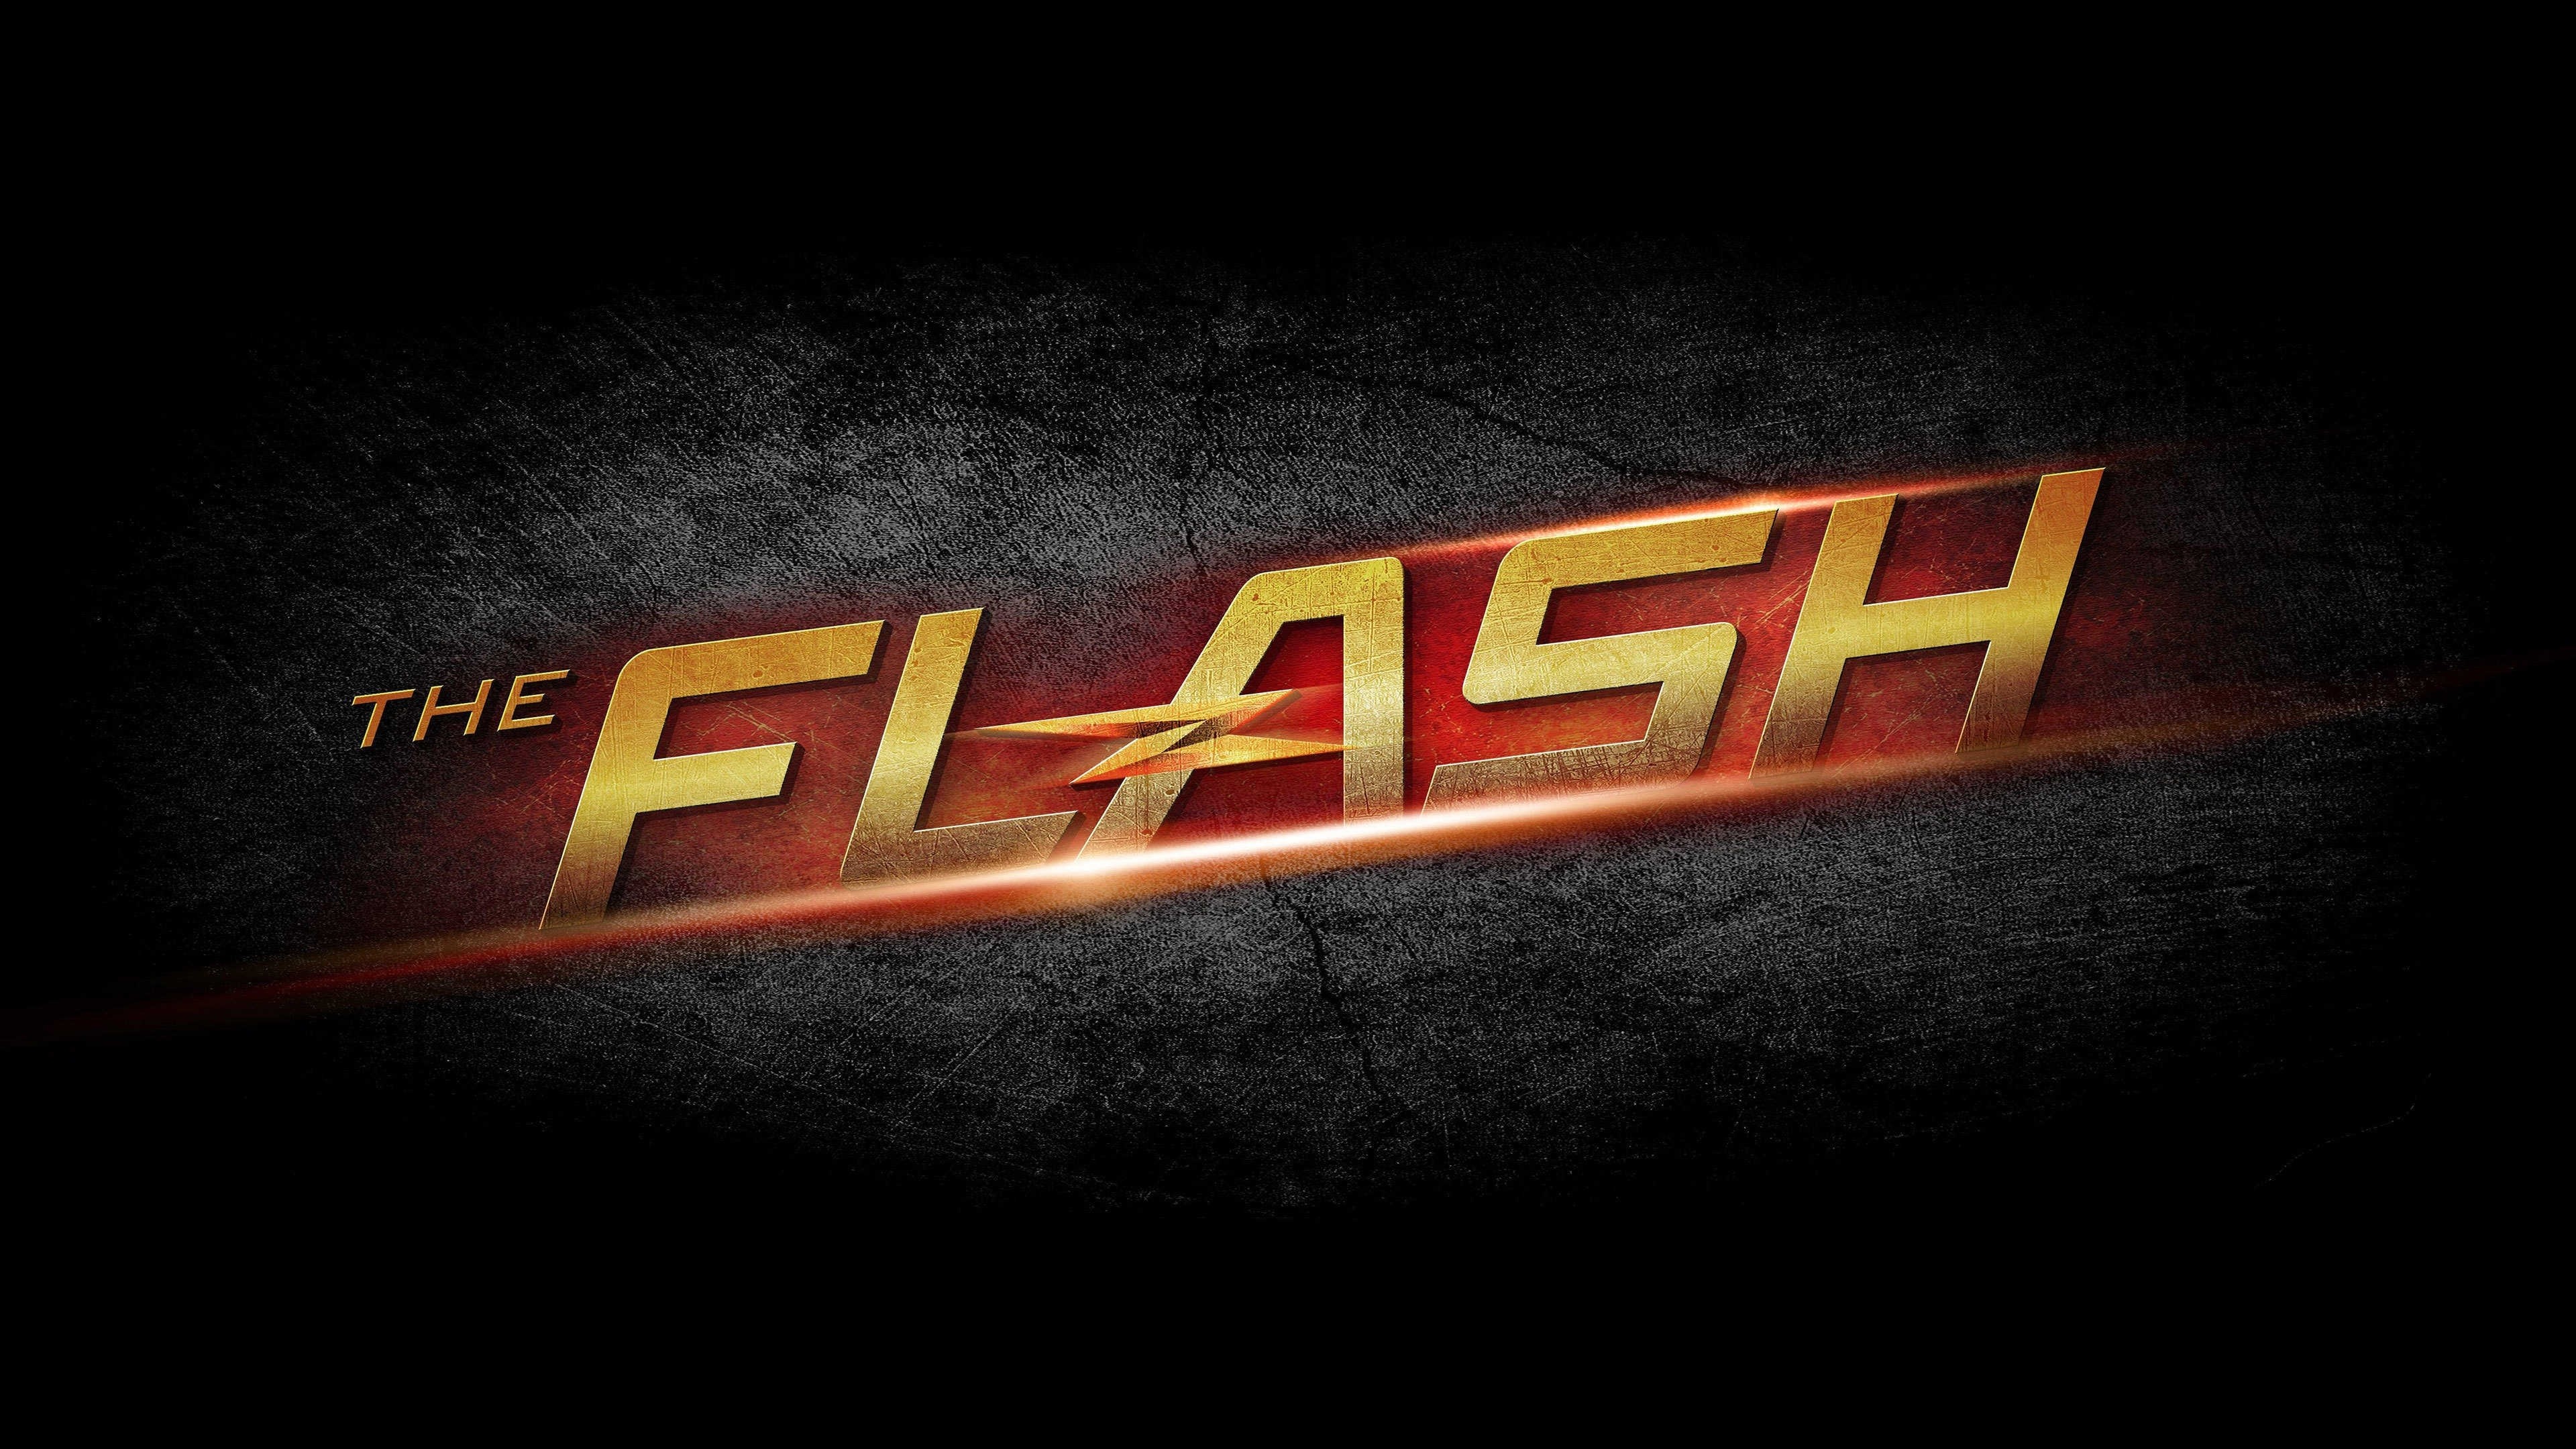 3840x2160 Title : the flash | wallpapers | pinterest | flash wallpaper and wallpaper.  Dimension : 3840 x 2160. File Type : JPG/JPEG